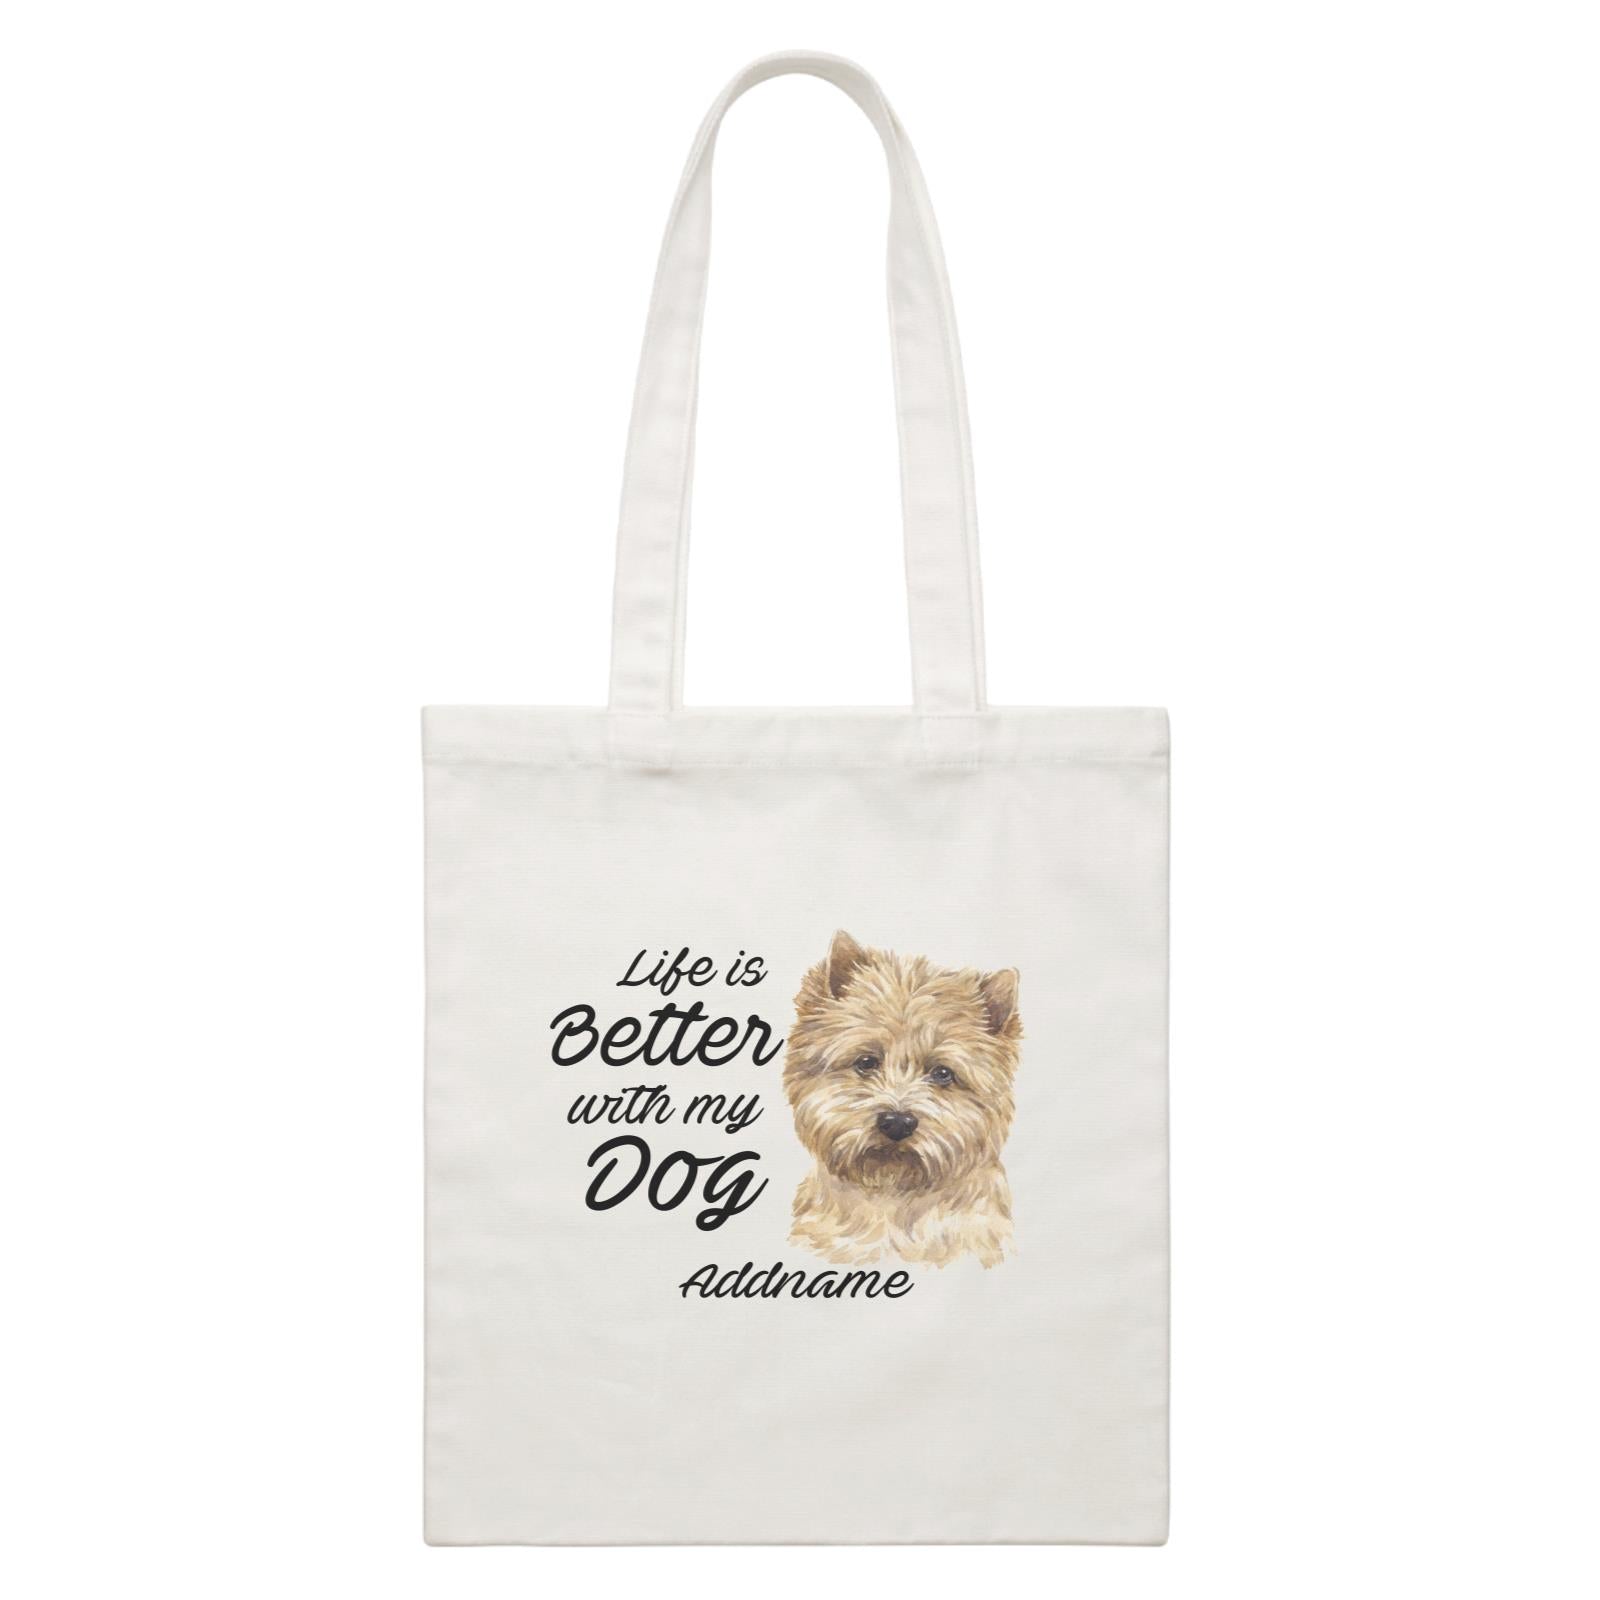 Watercolor Life is Better With My Dog Cairn Terrier Addname White Canvas Bag